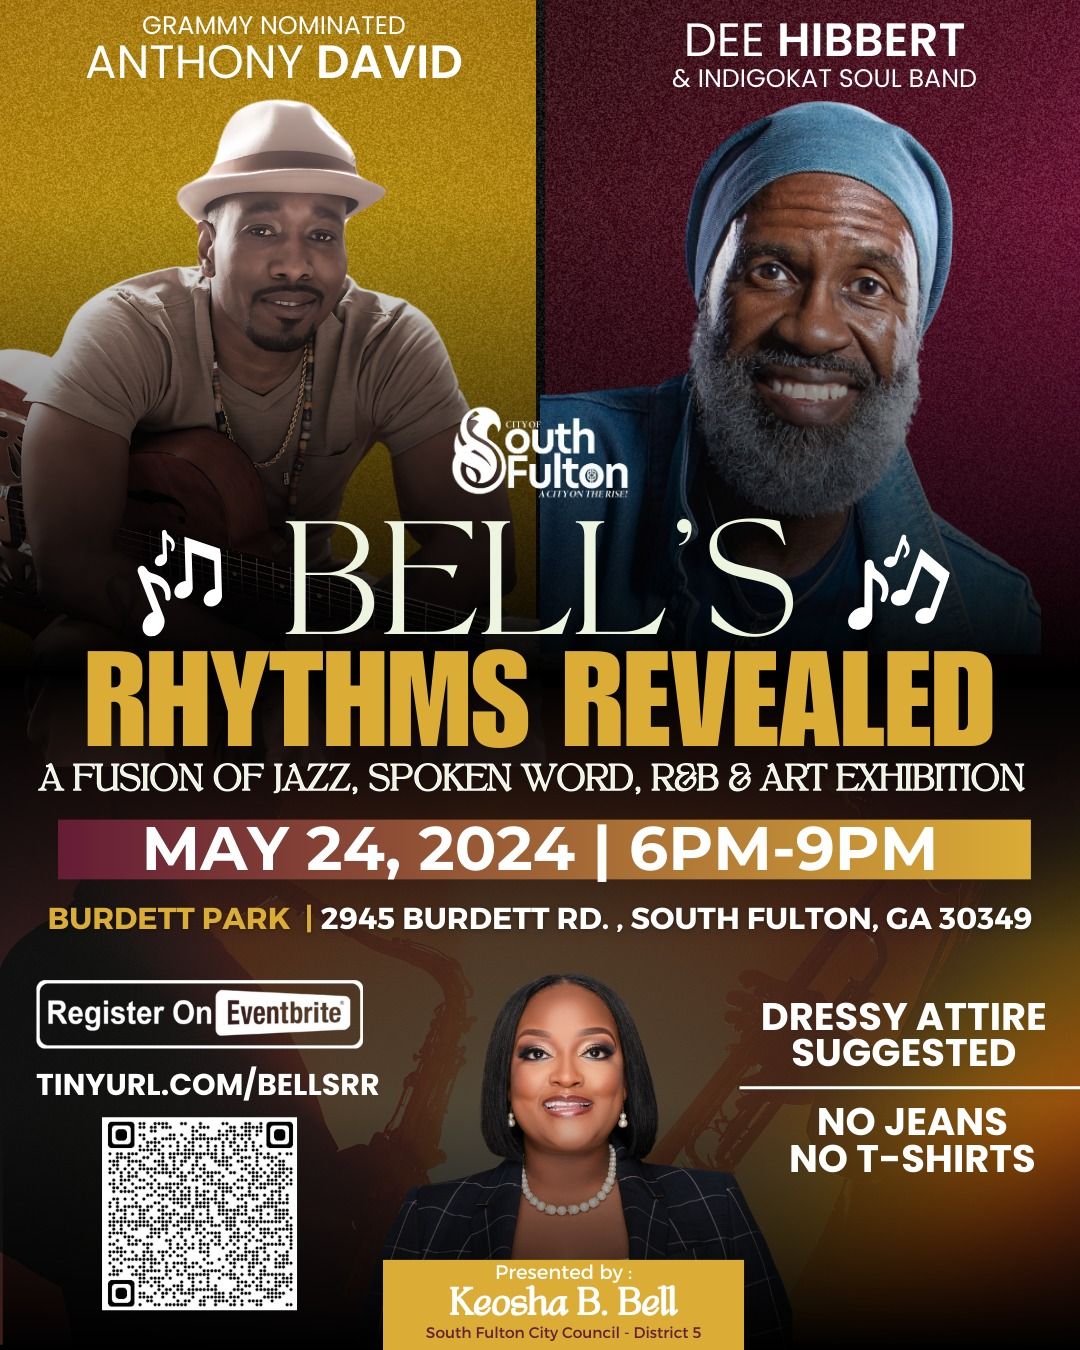 Bell's Rhythms Revealed:  A Fusion of Jazz, Spoken Word, R&B & Art Exhibition